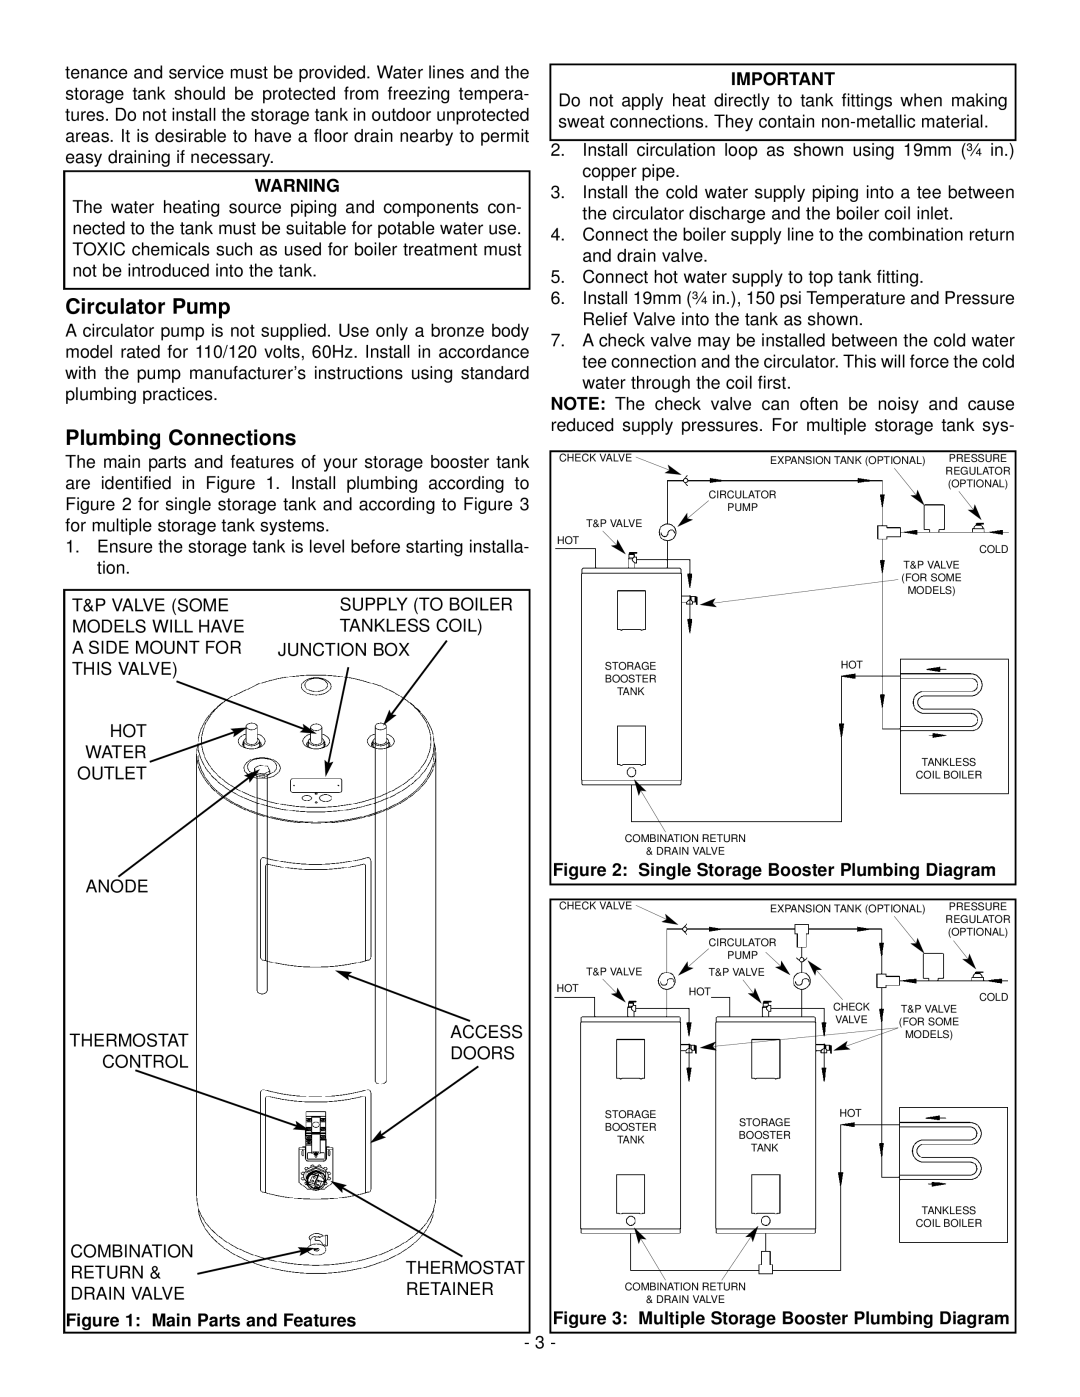 GSW WATER HEATING Circulator Pump, Plumbing Connections, Single Storage Booster Plumbing Diagram, Main Parts and Features 